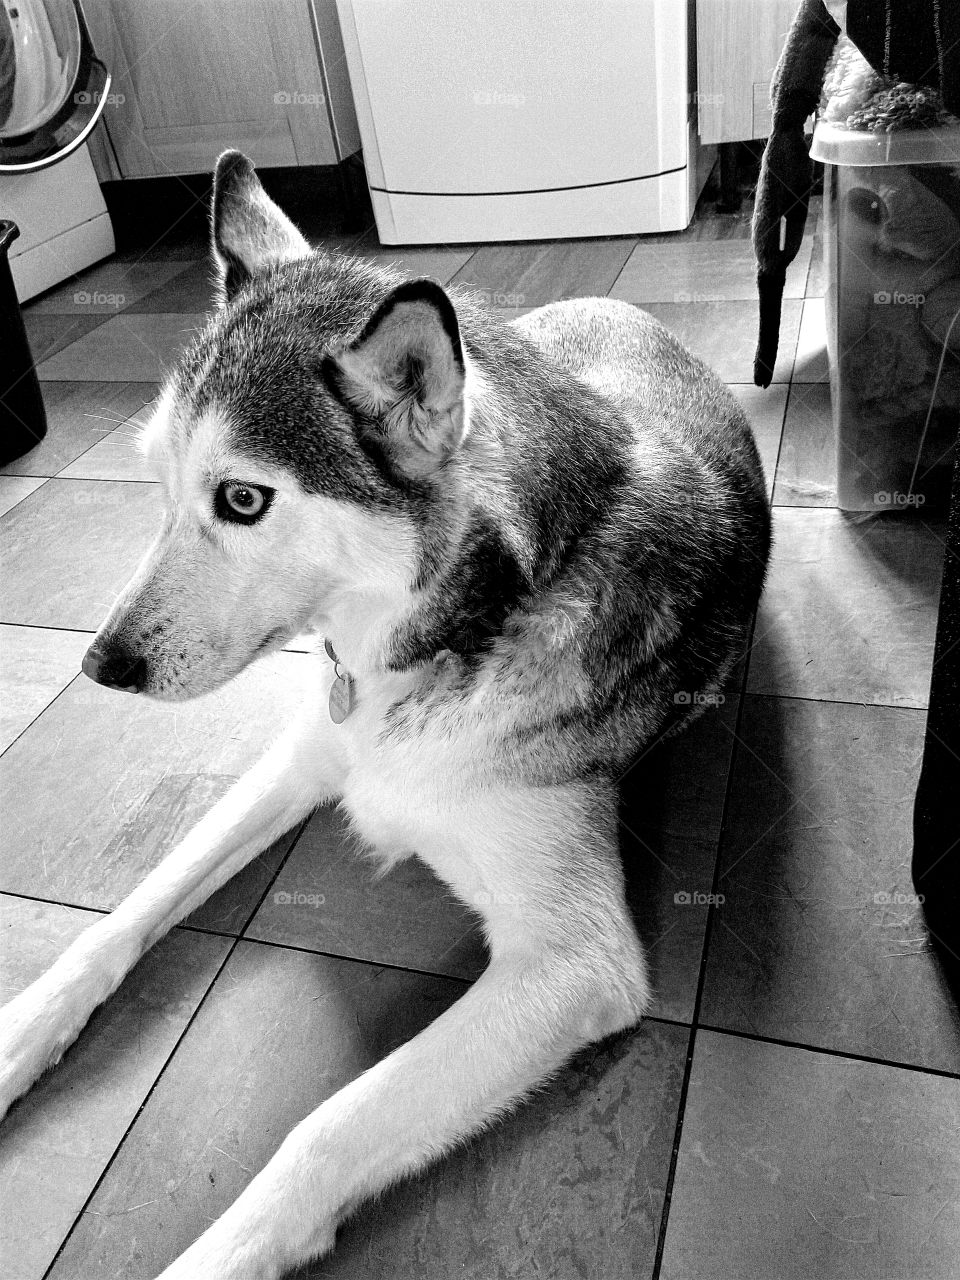 My Siberian husky laying on my kitchen floor in black and white